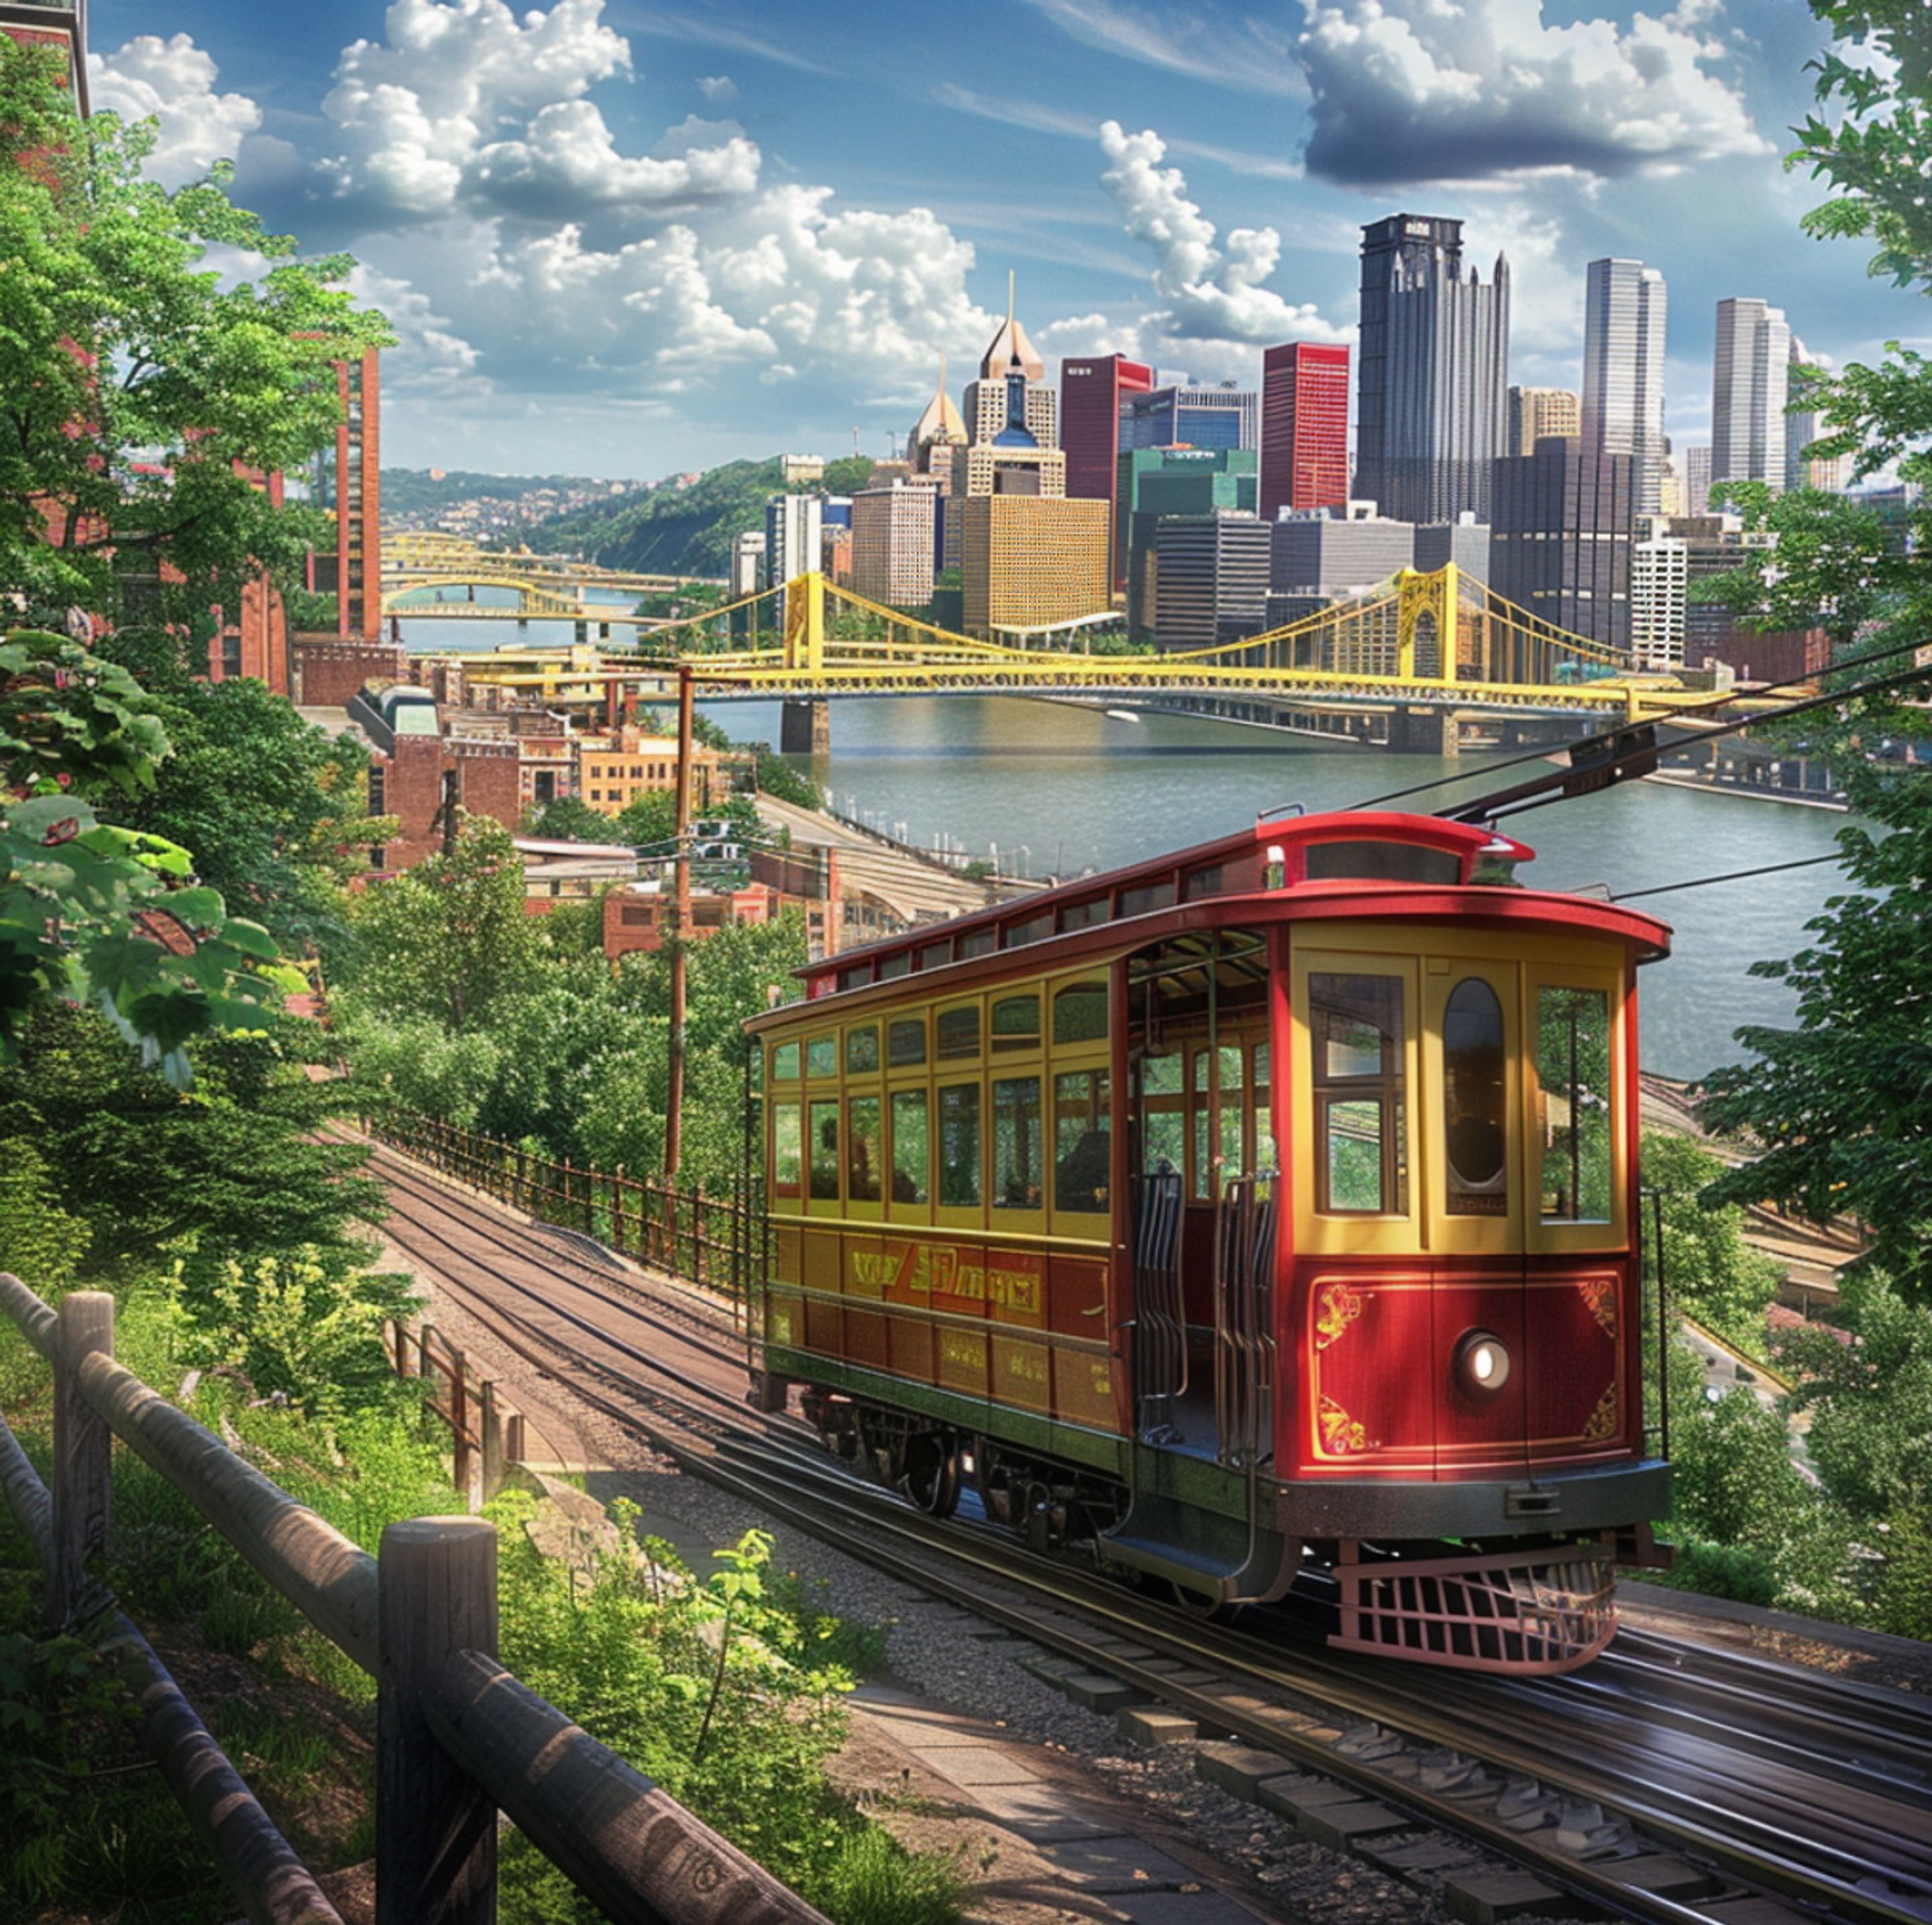 A historic red Duquesne Incline cable car ascends Mount Washington with a panoramic view of Pittsburgh, Pennsylvania, featuring the city's iconic yellow bridges and the downtown skyline on a clear, sunny day.